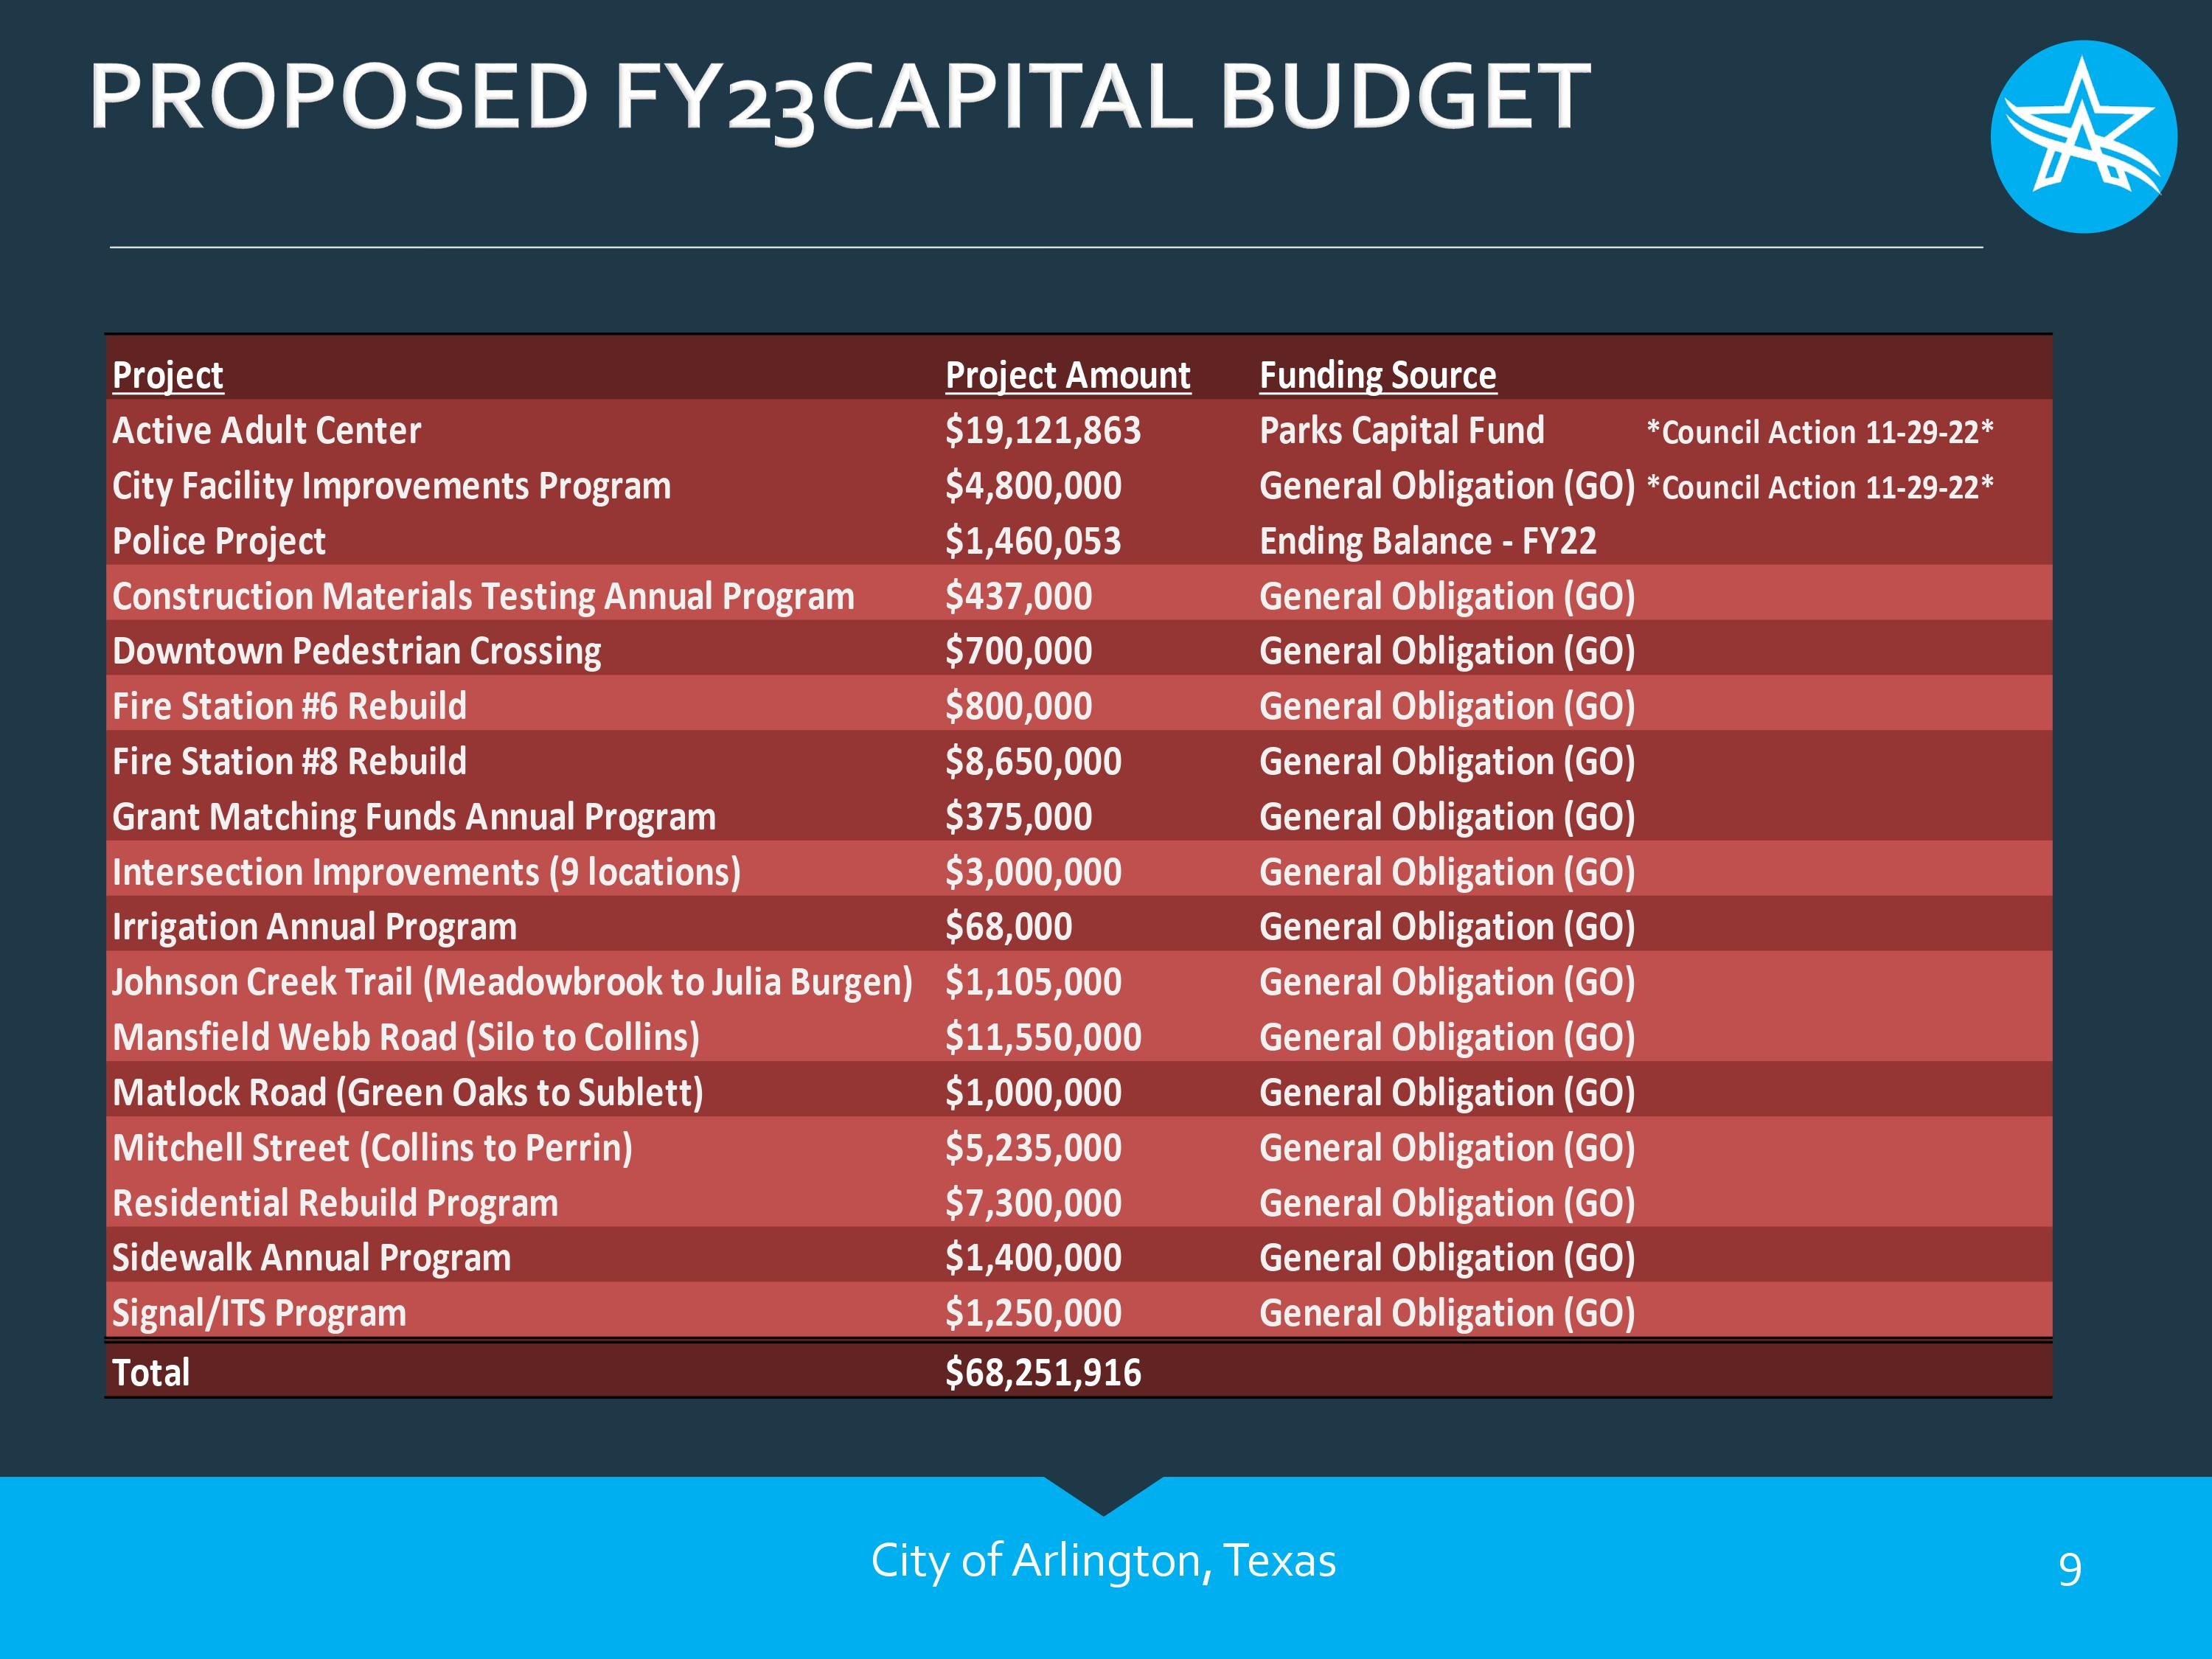 Proposed FY23 Capital Budget